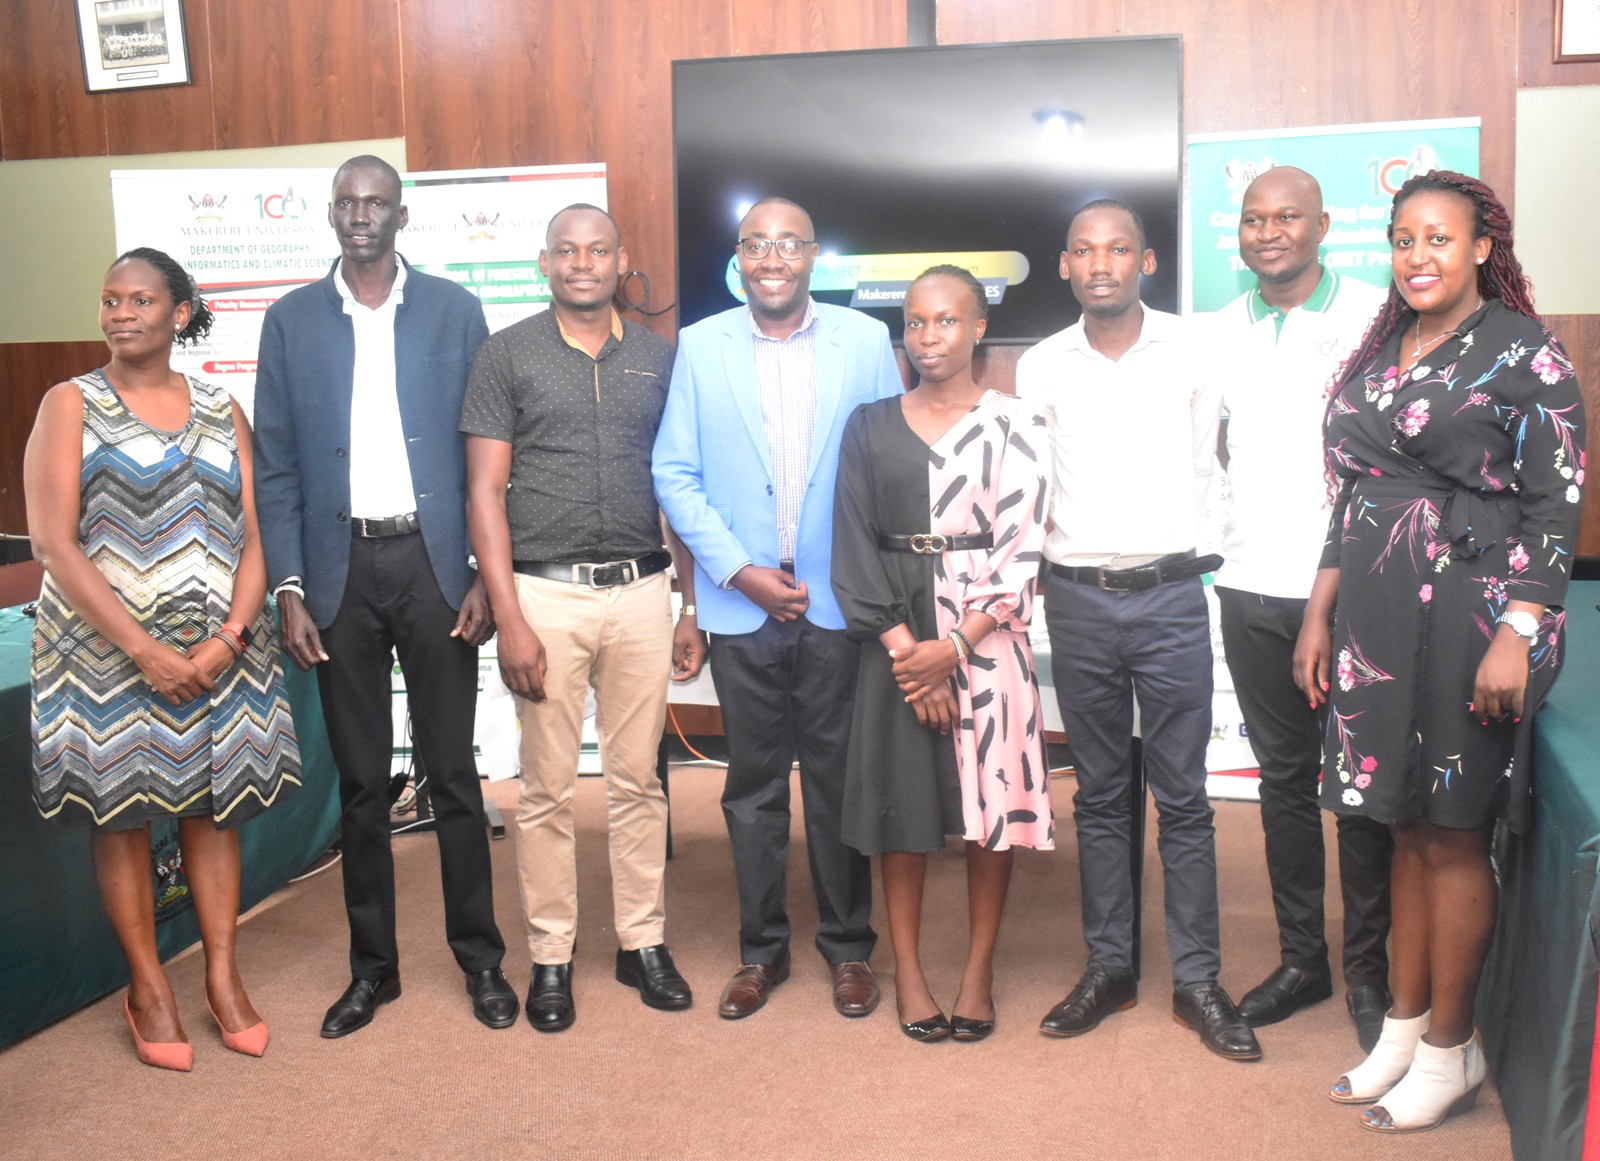 Prof. Frank Mugagga, SET Project Coordinator (C) with some of the graduate students after the research seminar on 11th October 2022, Makerere University.